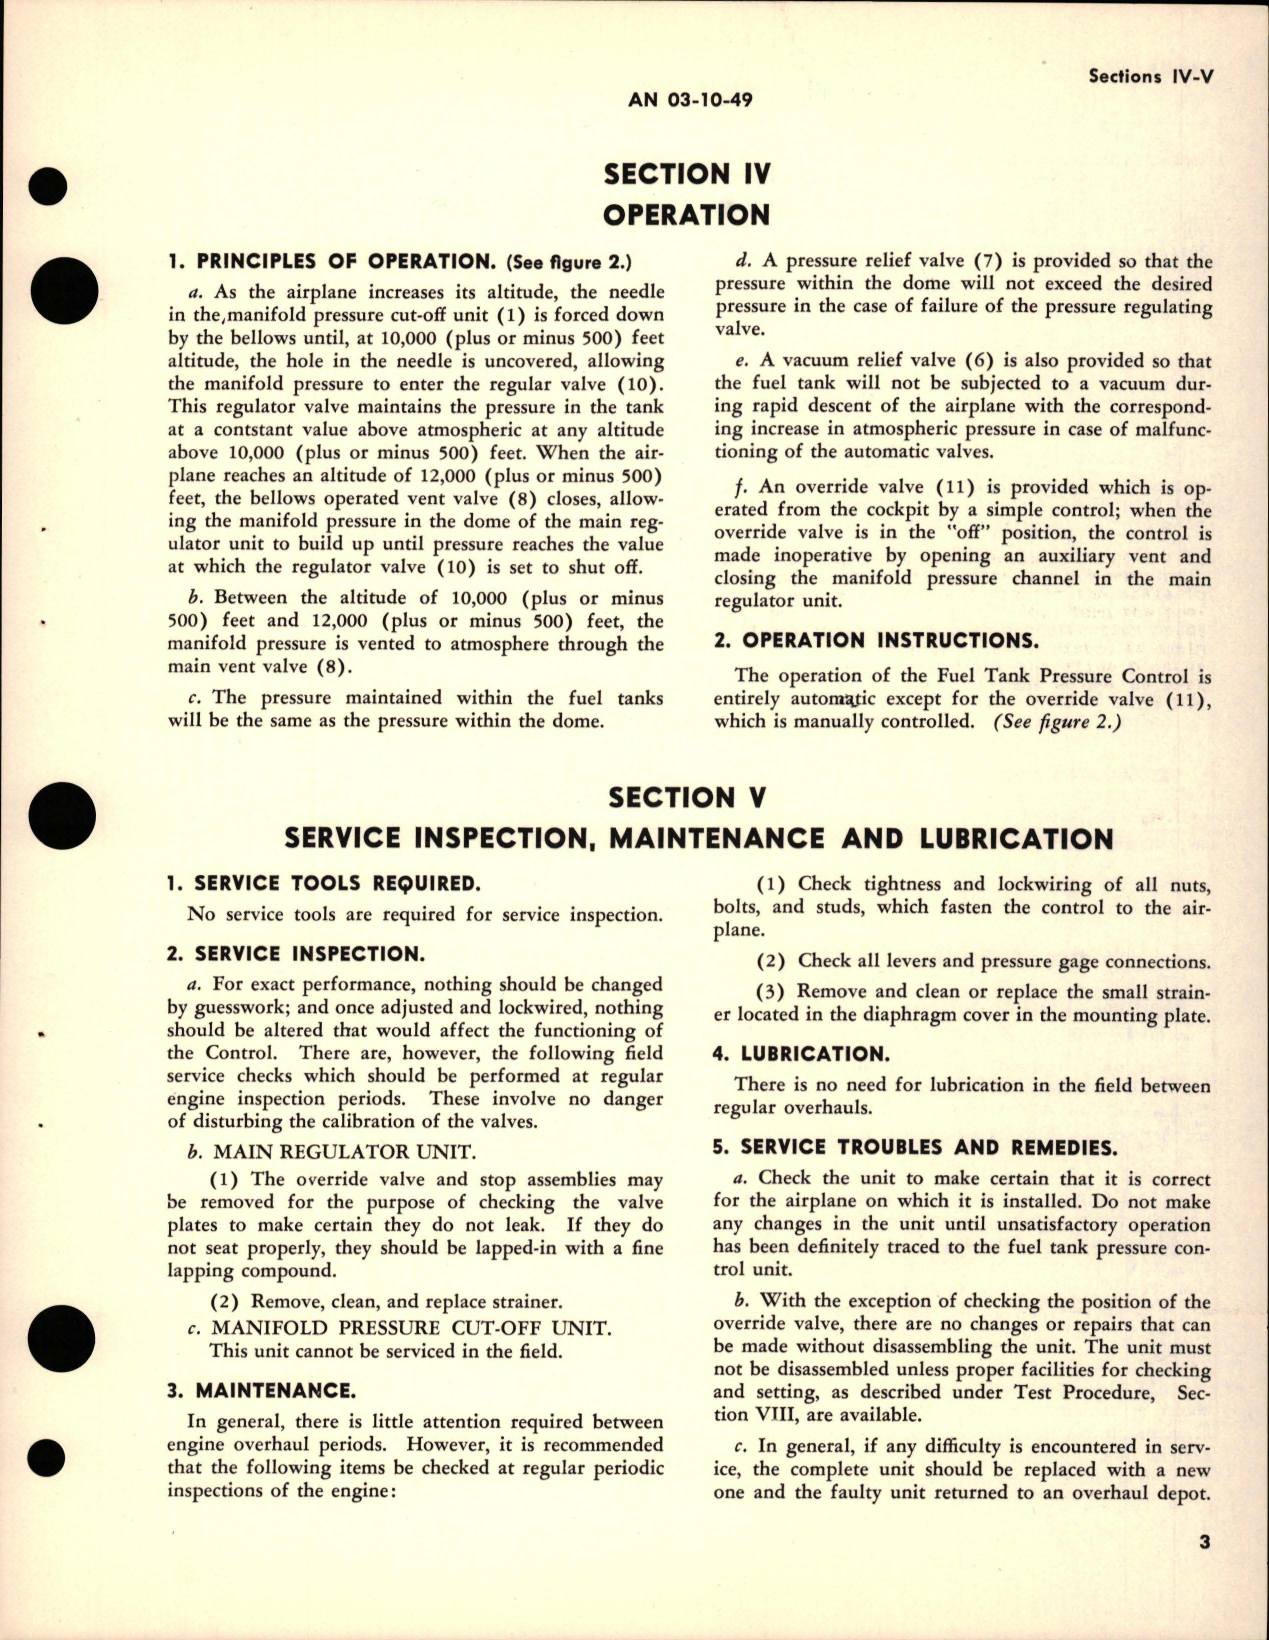 Sample page 7 from AirCorps Library document: Instructions with Parts Catalog for Fuel Tank Pressure Control